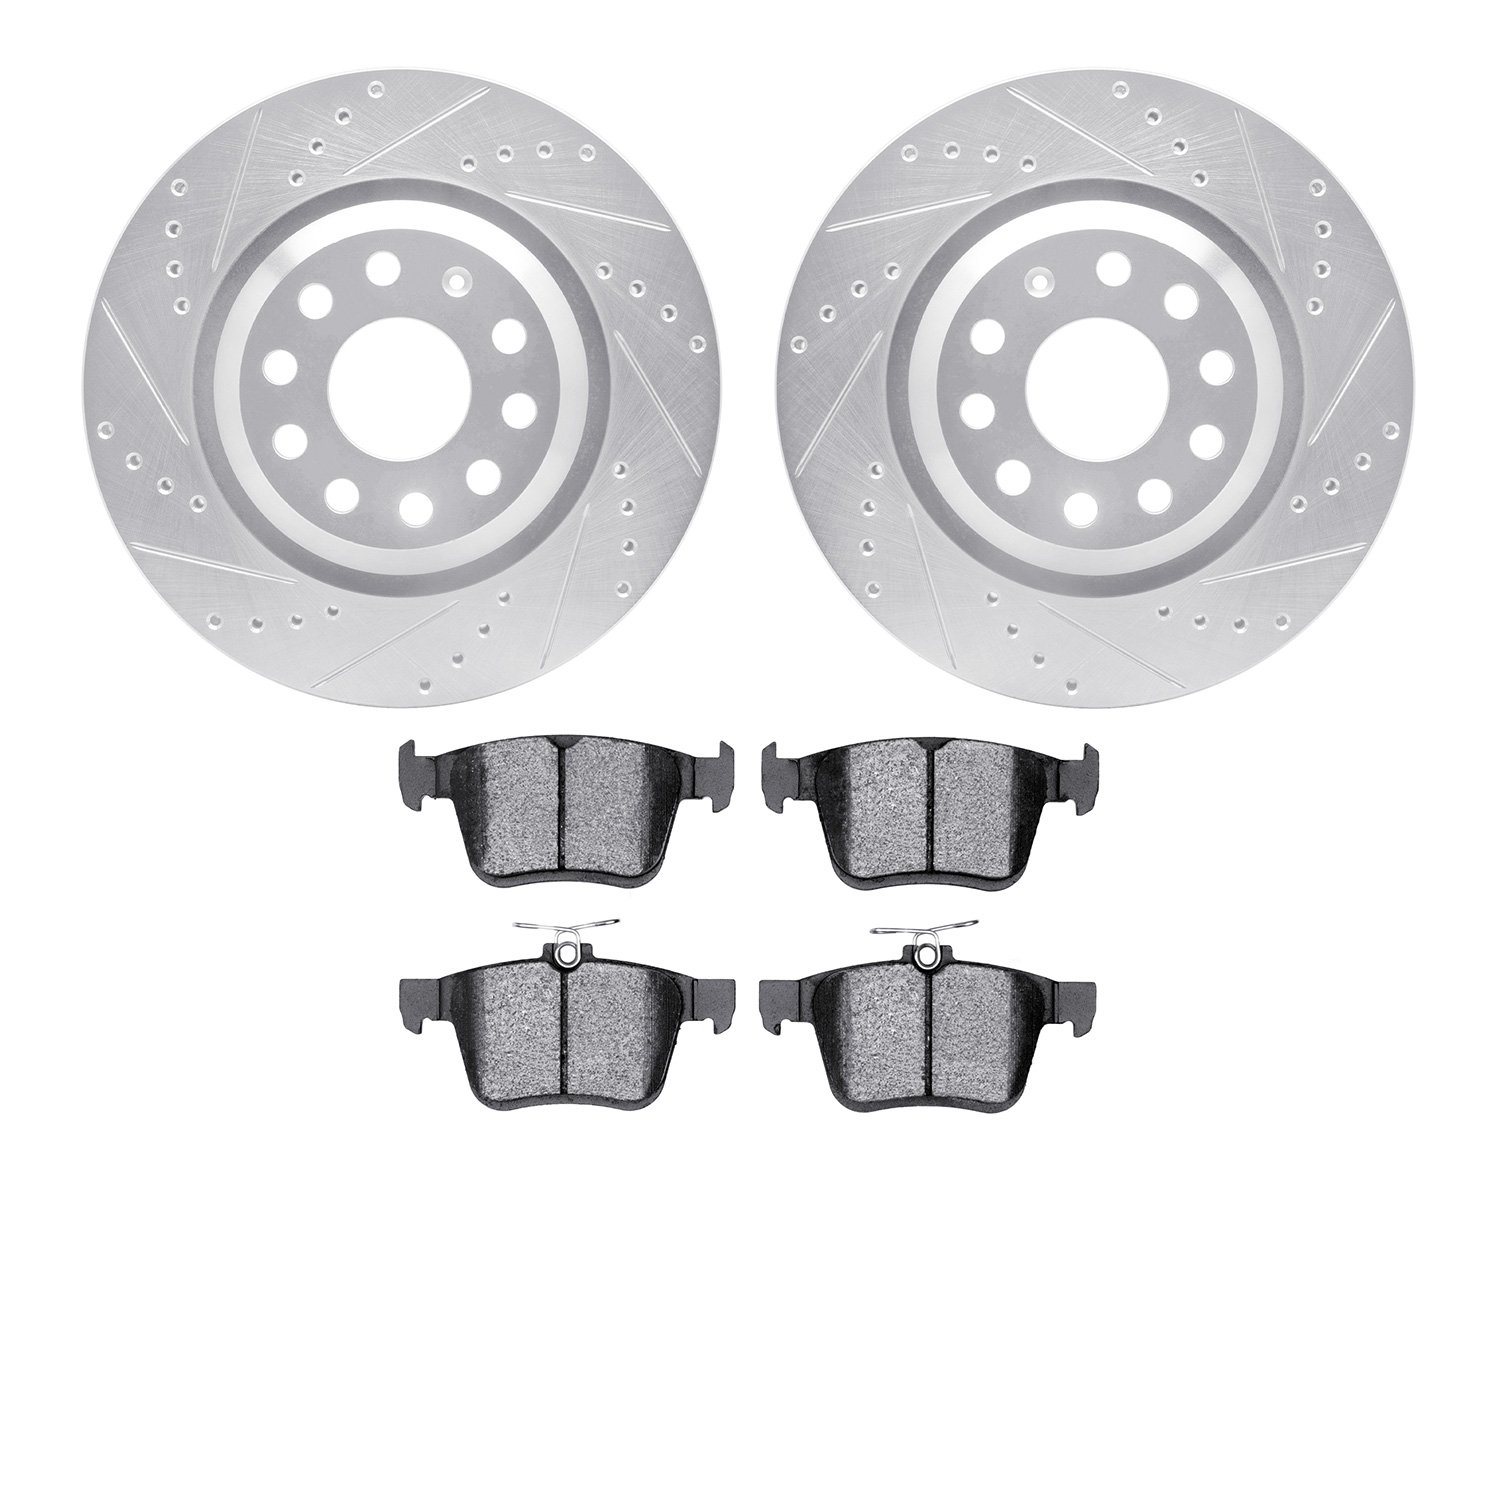 7502-74093 Drilled/Slotted Brake Rotors w/5000 Advanced Brake Pads Kit [Silver], Fits Select Audi/Volkswagen, Position: Rear